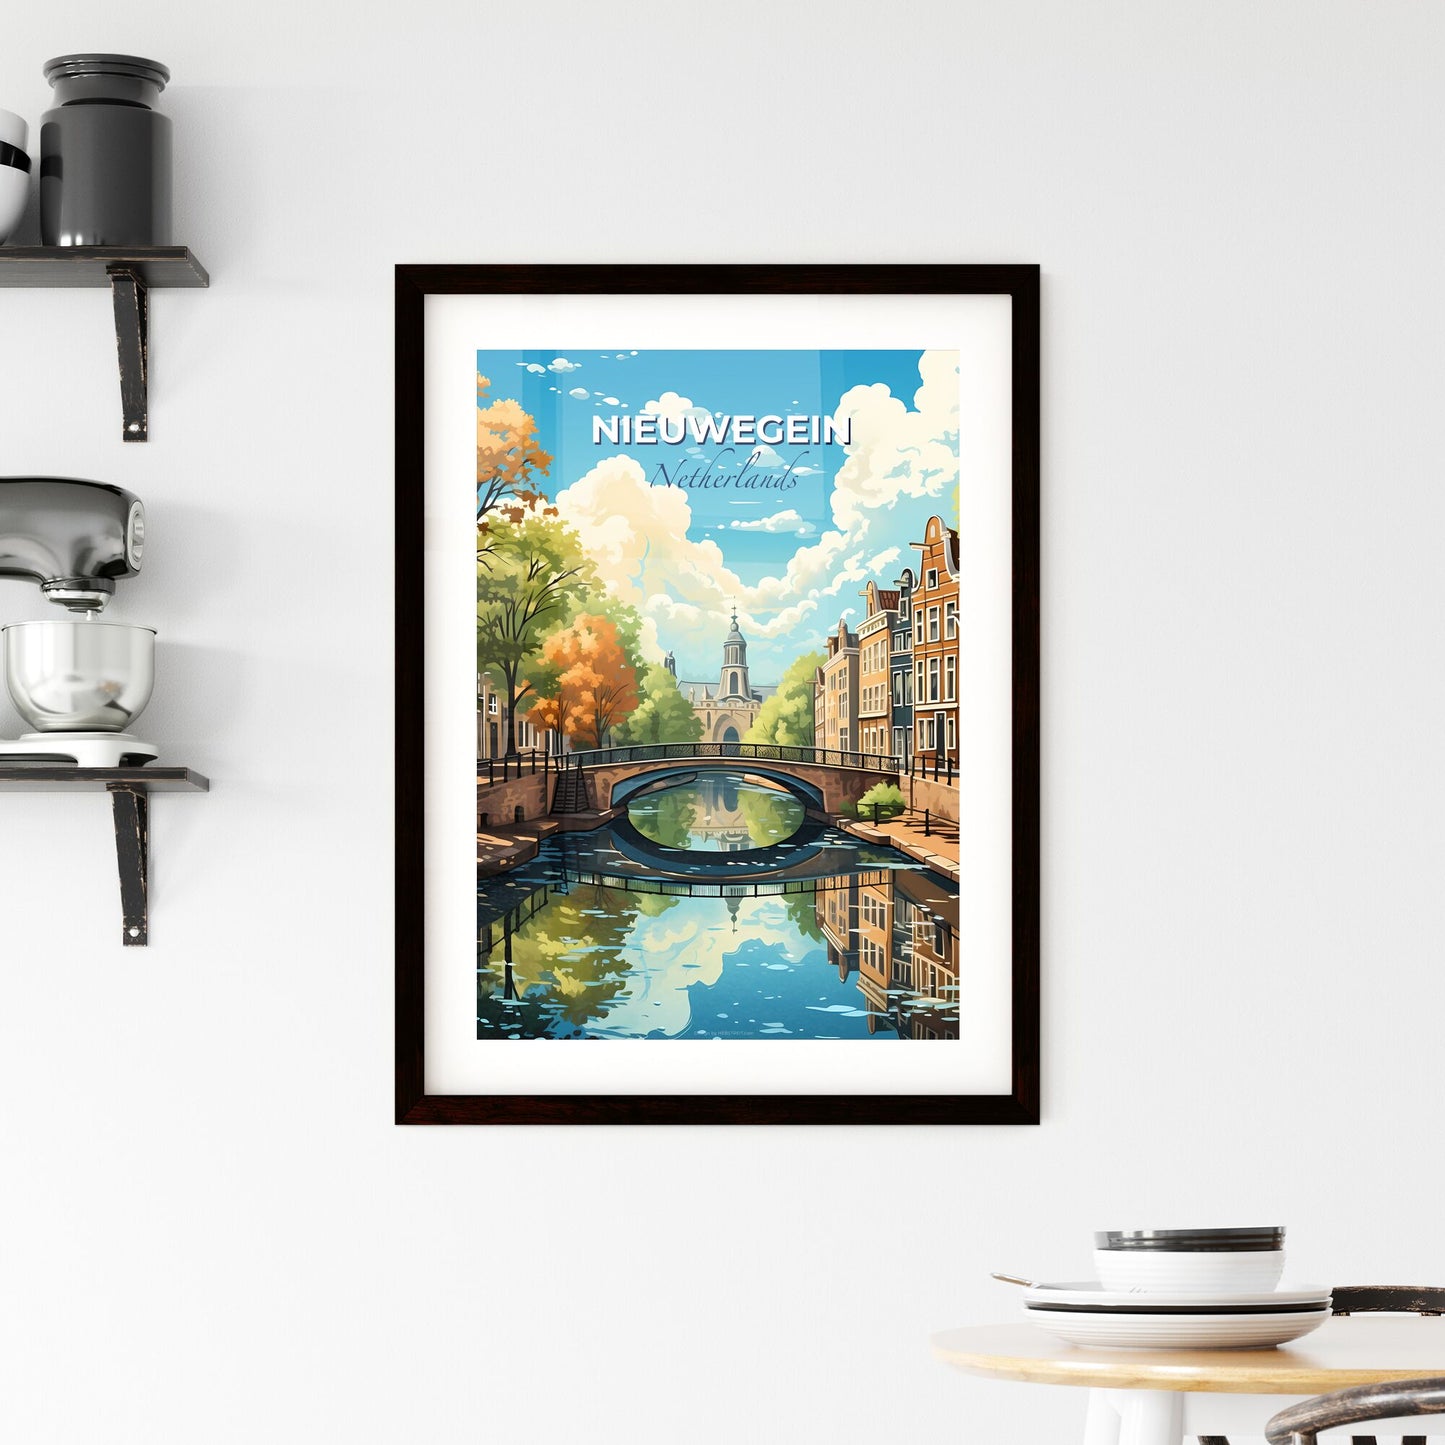 Nieuwegein, Netherlands, A Poster of a bridge over a river with trees and buildings Default Title